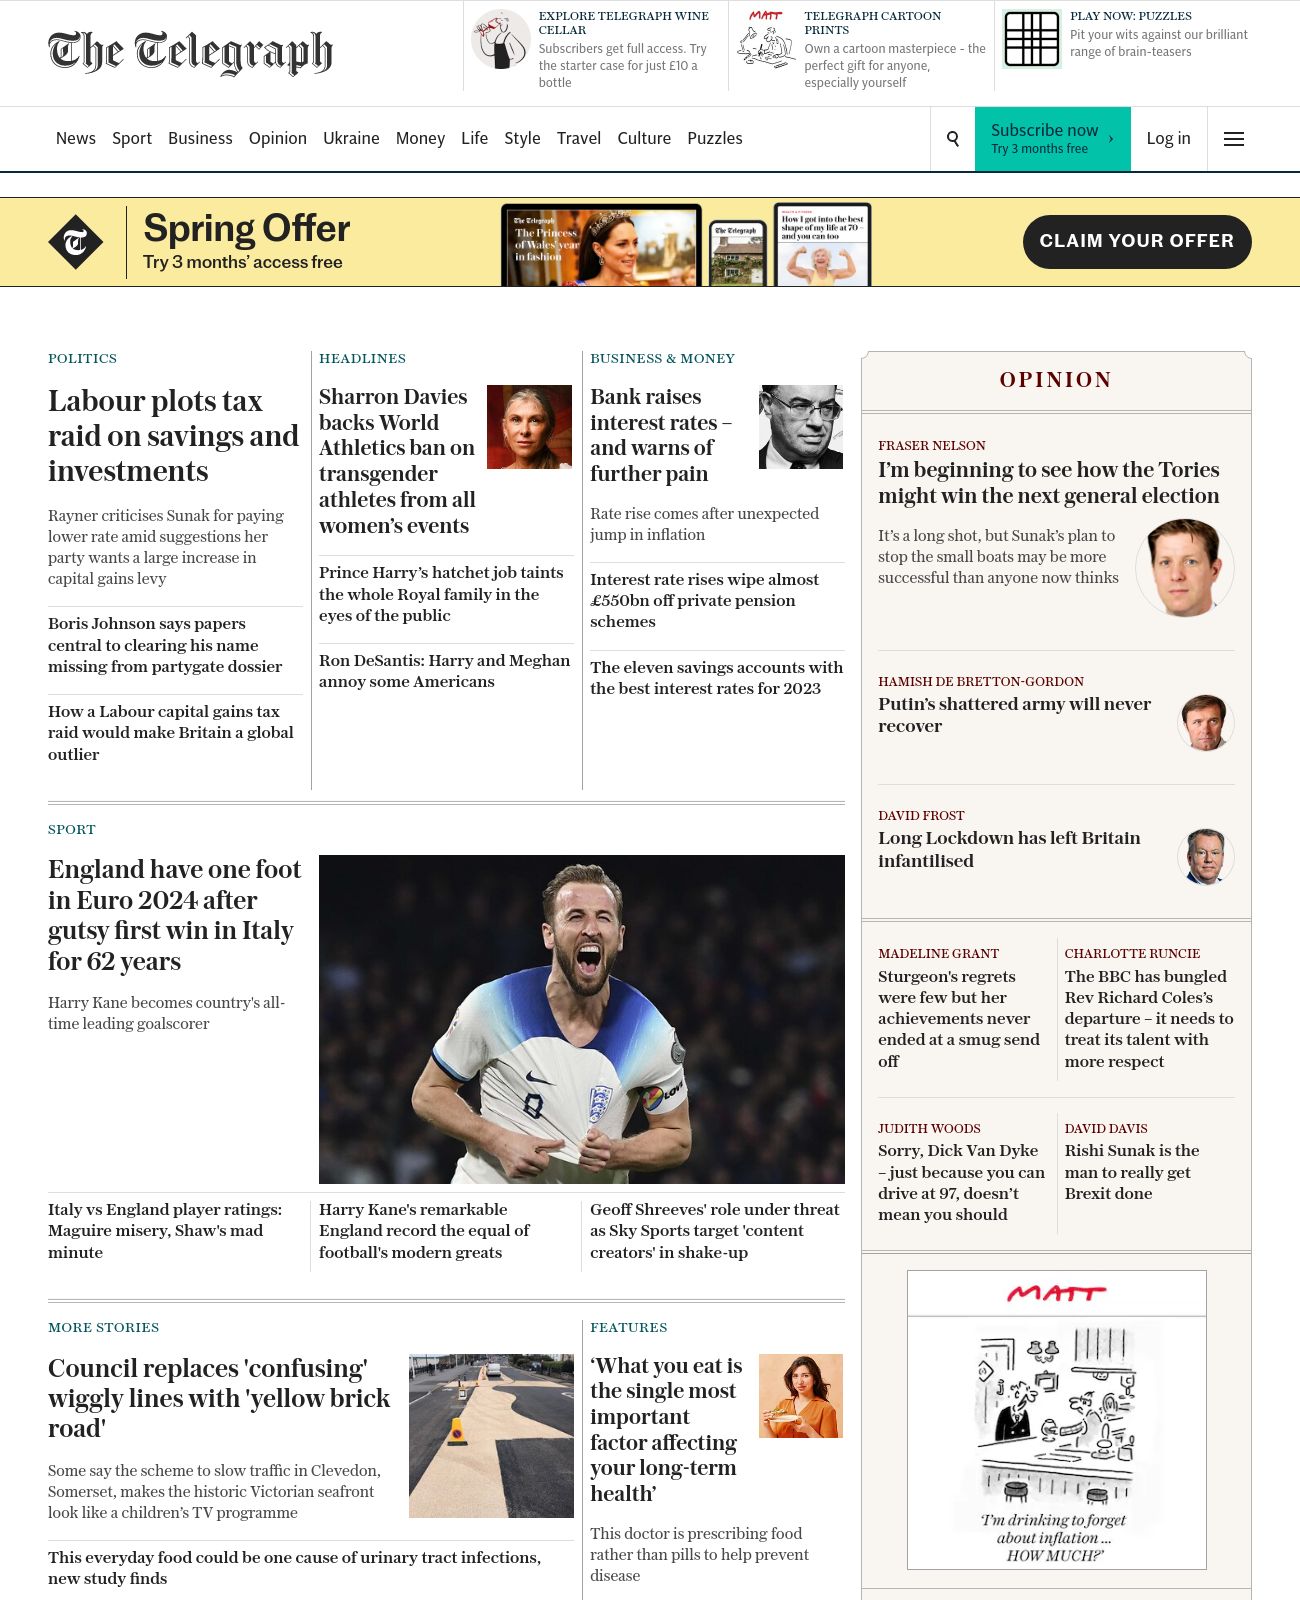 The Telegraph at 2023-03-24 00:23:58+00:00 local time